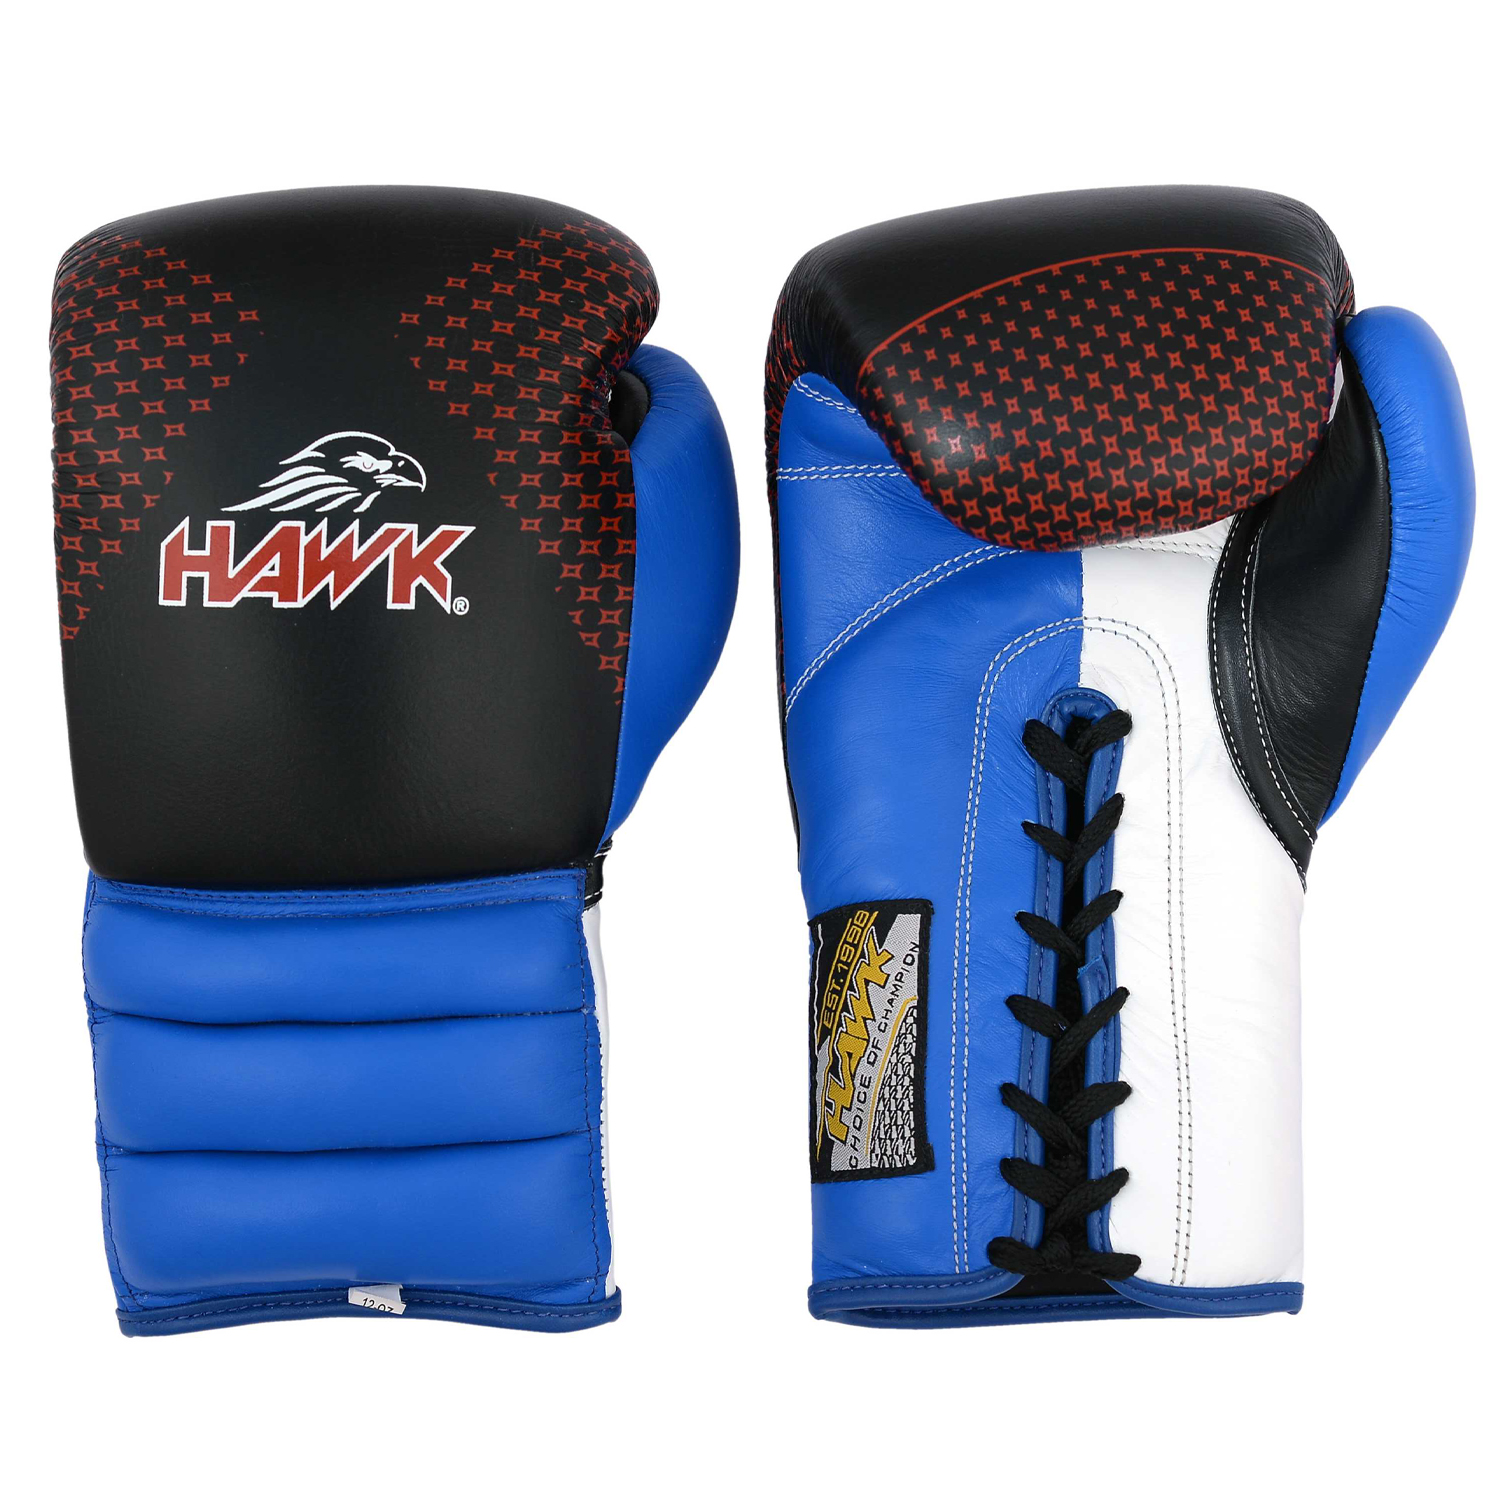 Hawk Boxing Lace Up Gloves, Traditional Training Hook Loop Gloves